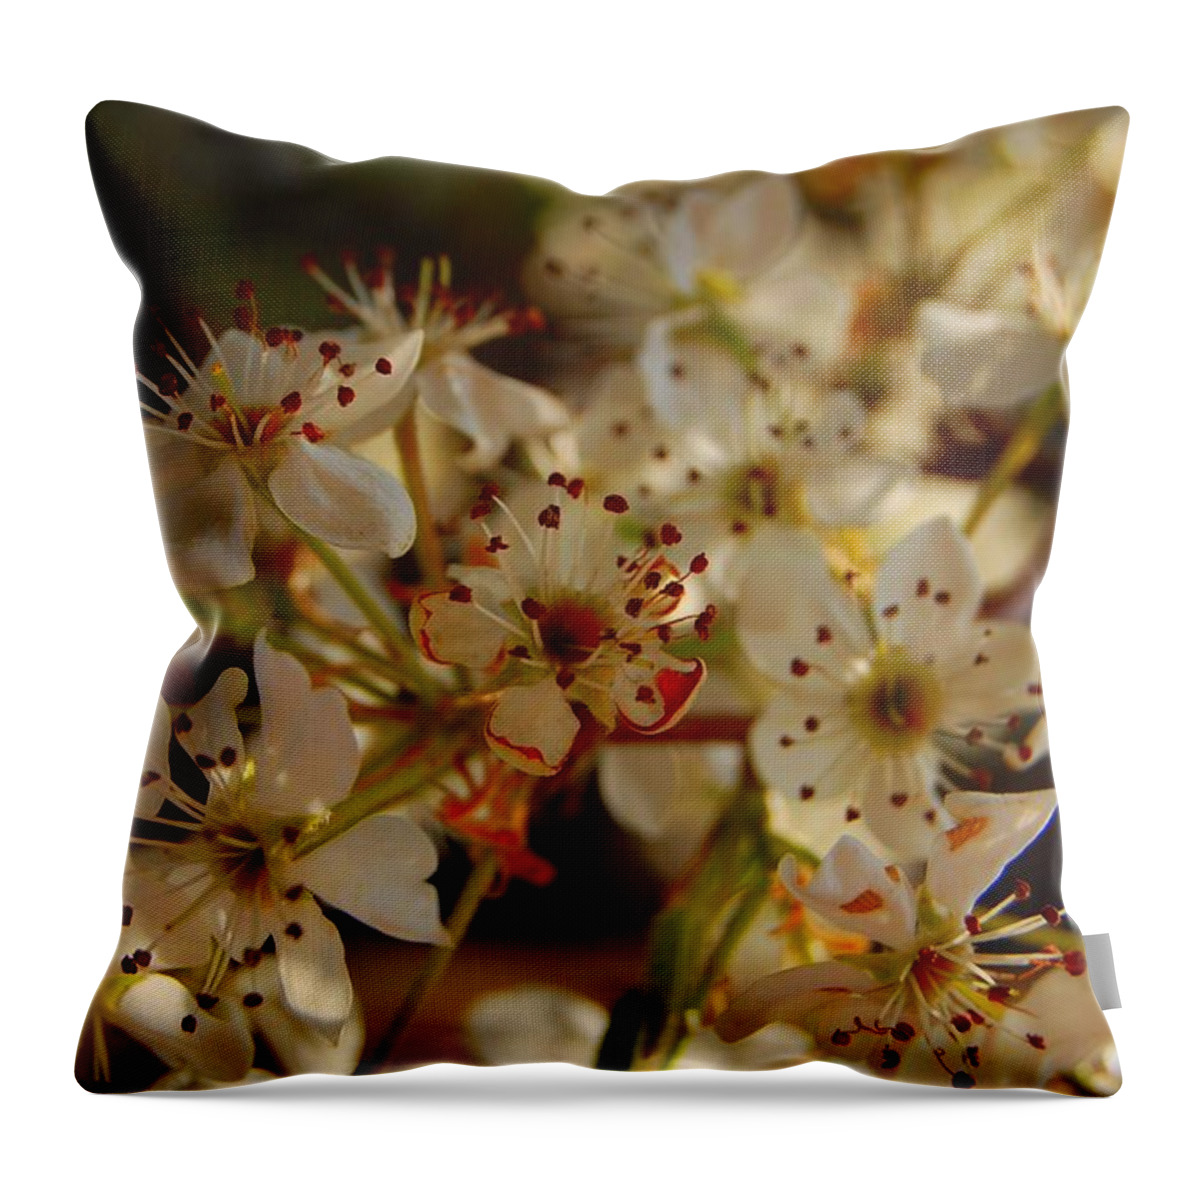 Blossom Throw Pillow featuring the photograph Faded Blossom by Anjanette Douglas